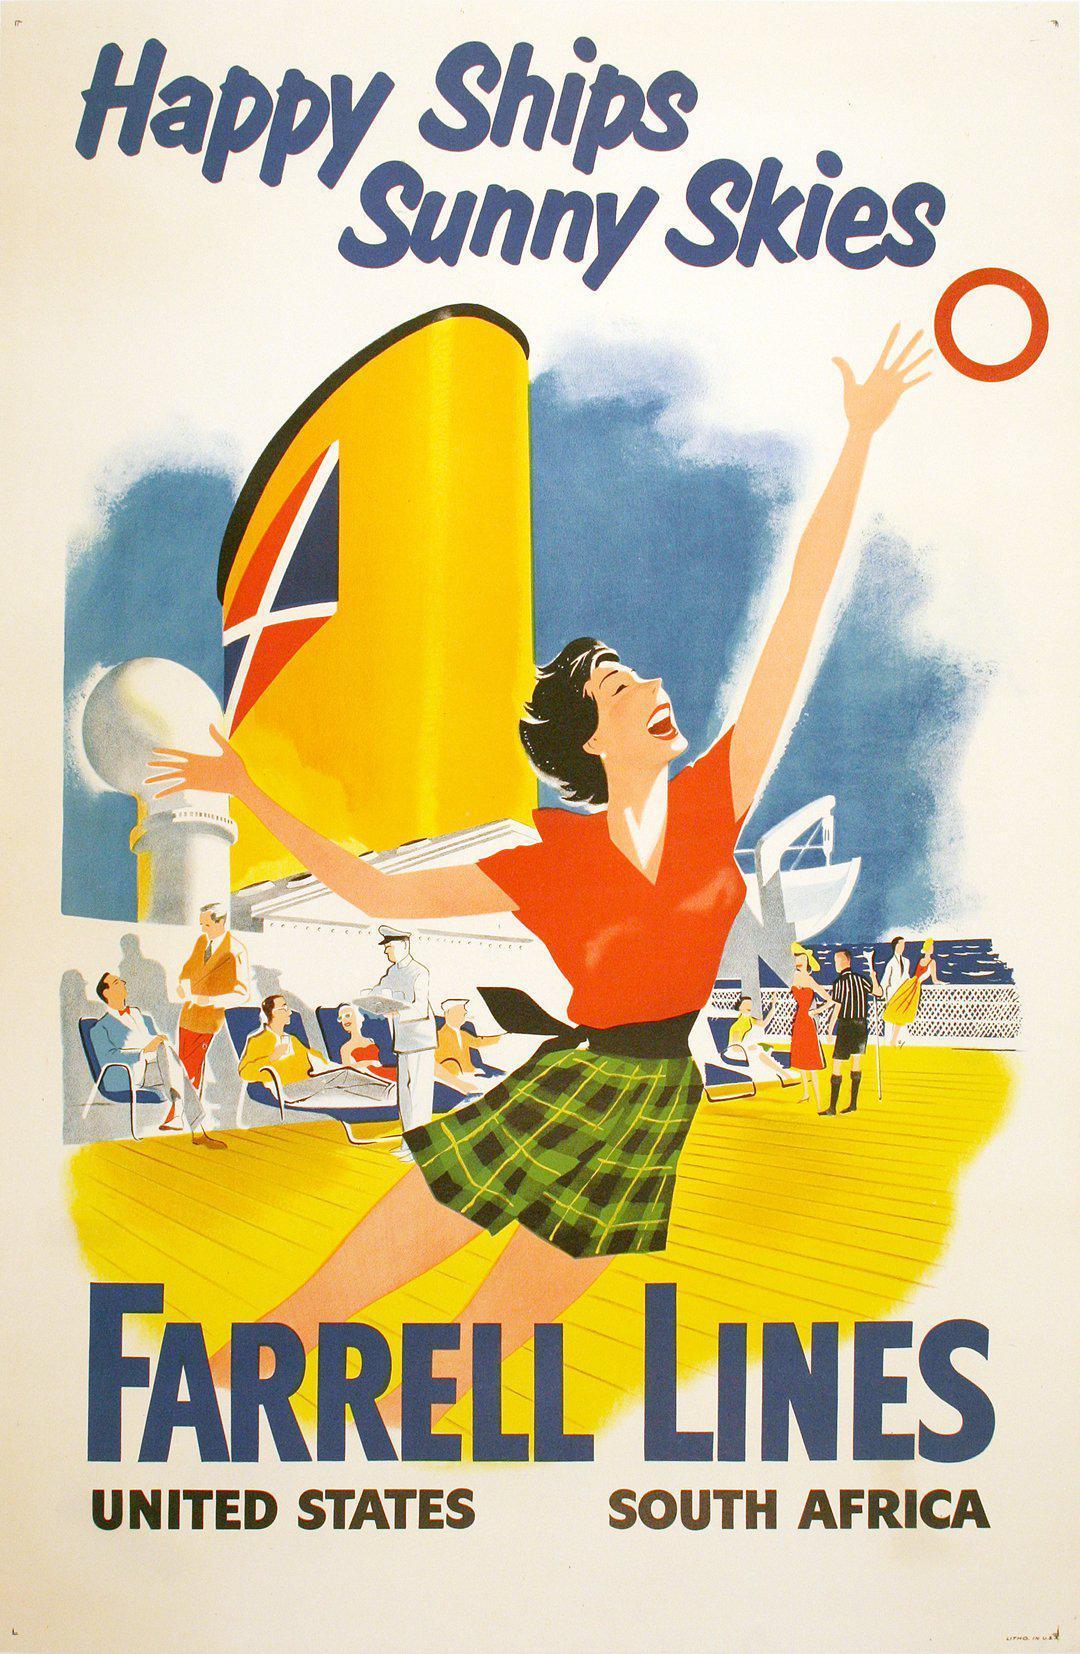 Original Vintage Cruise Poster Farrell Lines Happy Ships Sunny Skies South Africa c1950